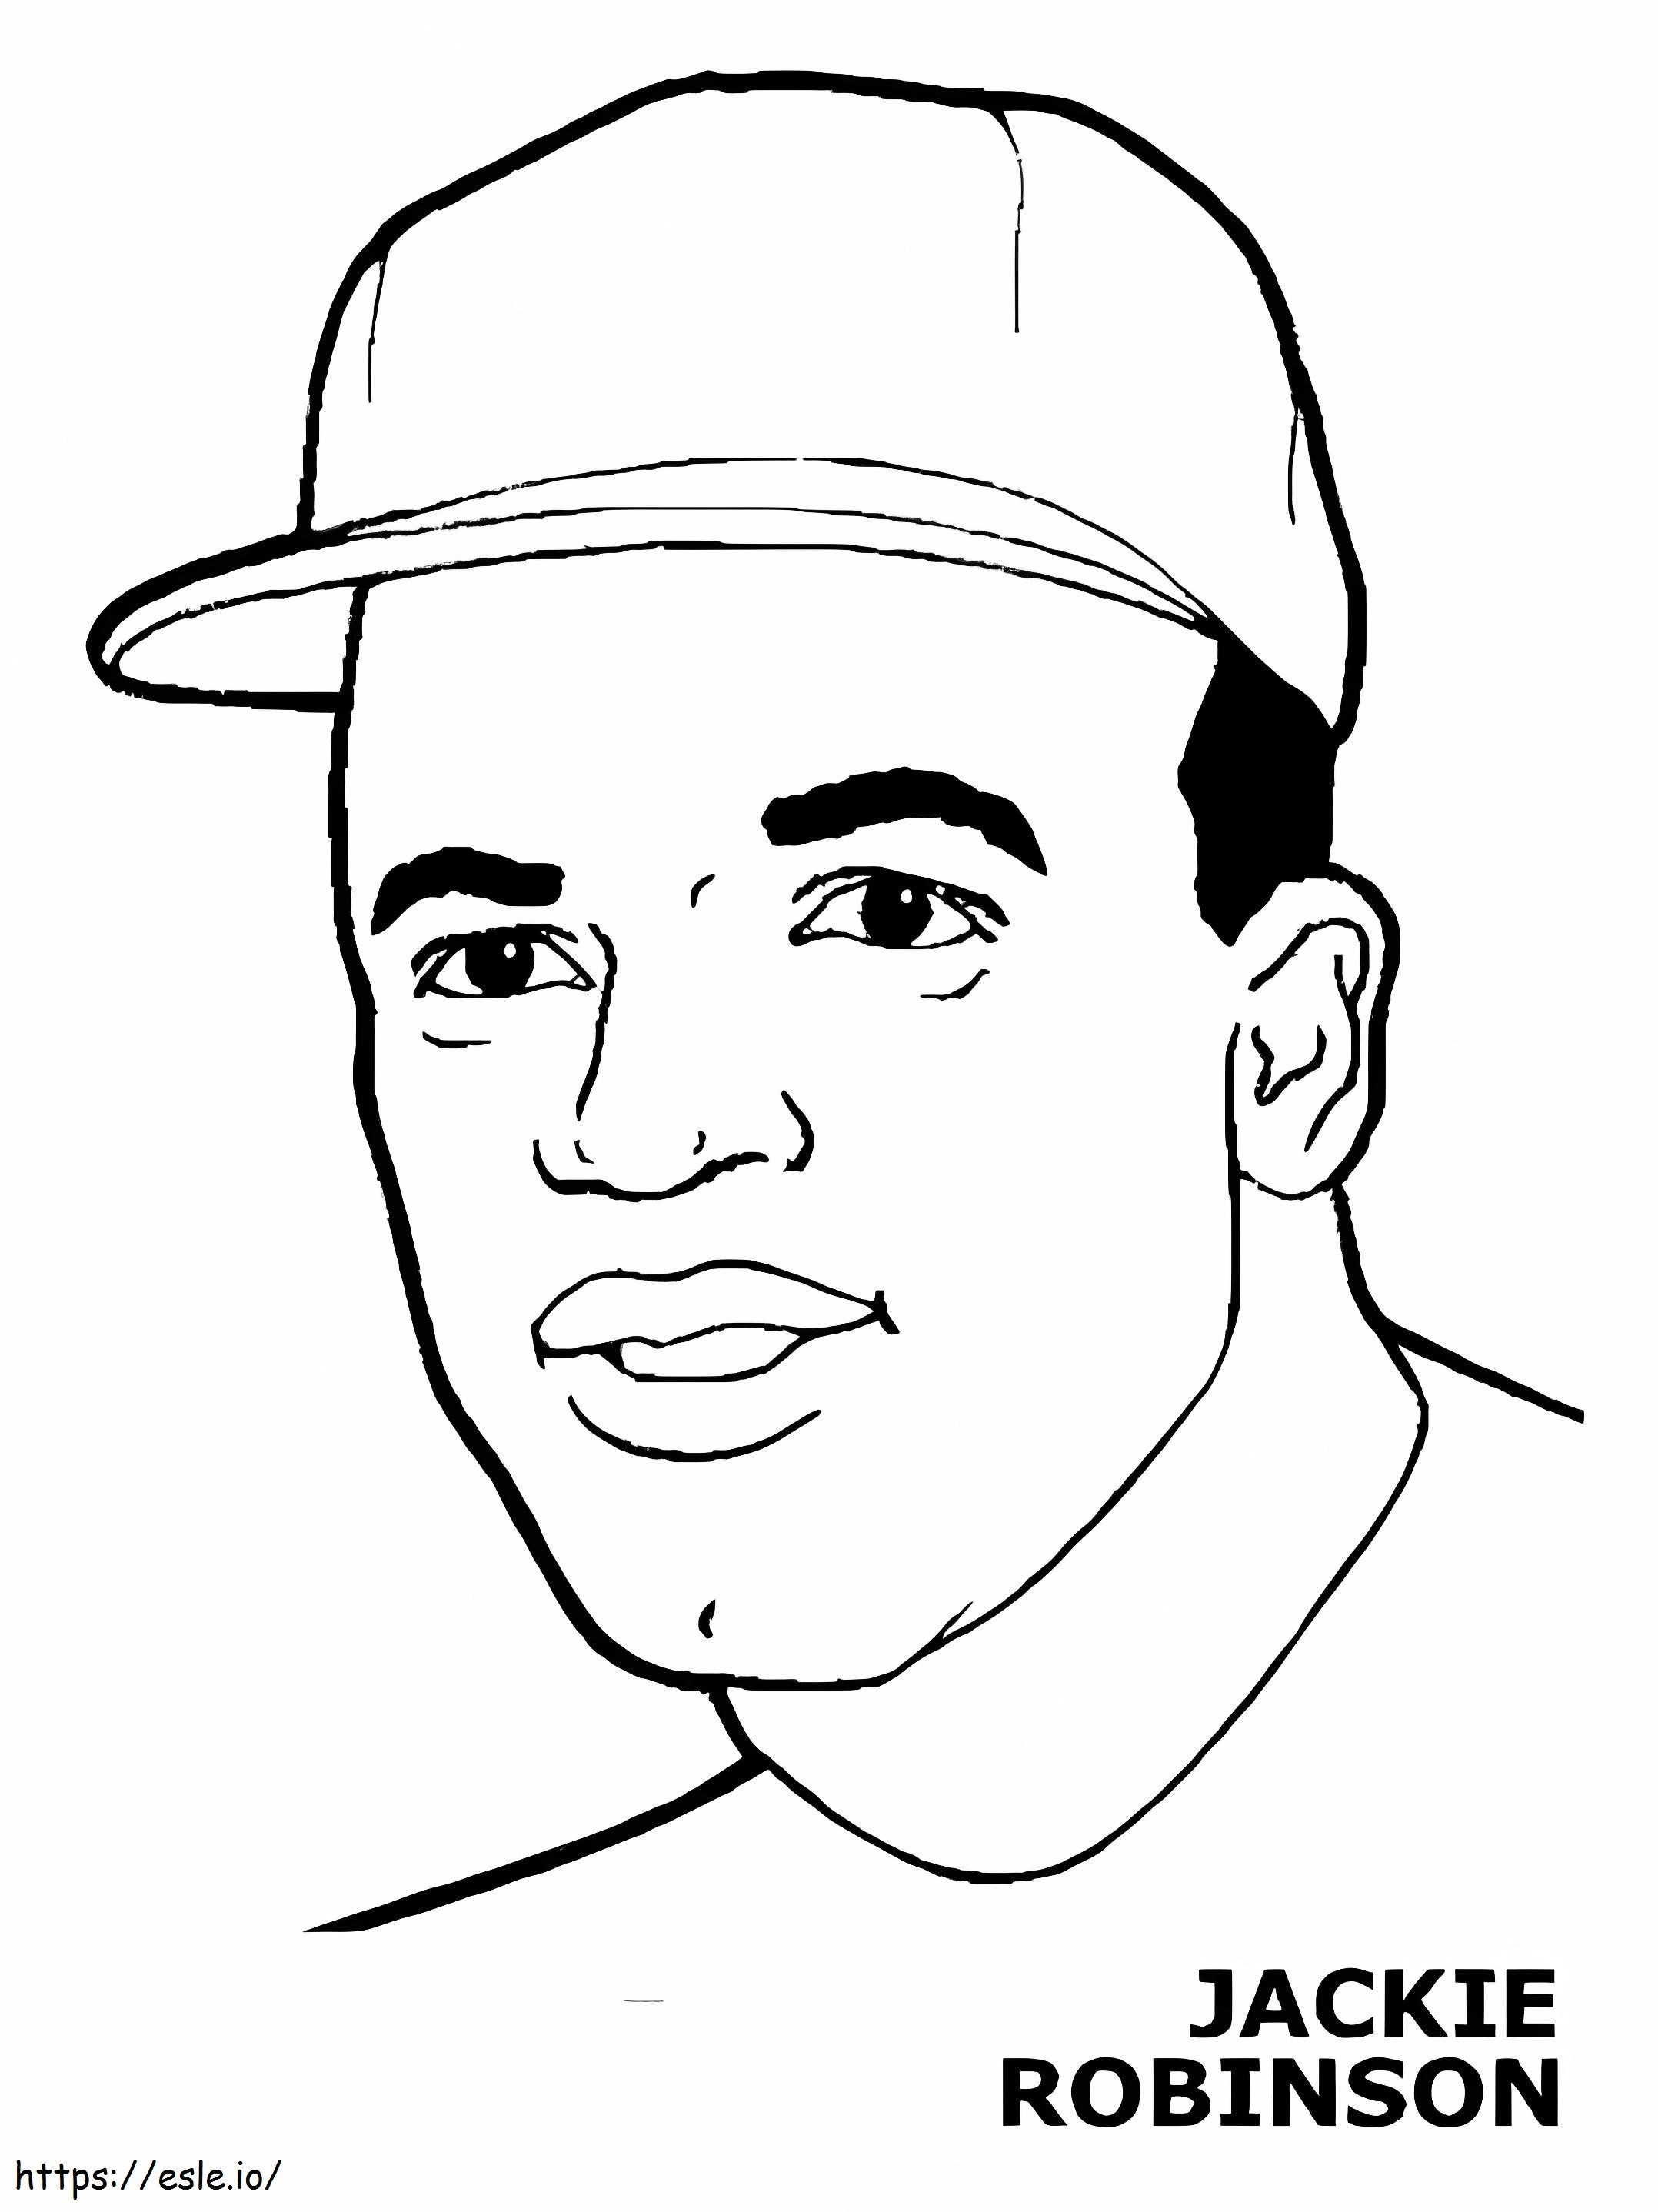 Jackie Robinson 8 coloring page